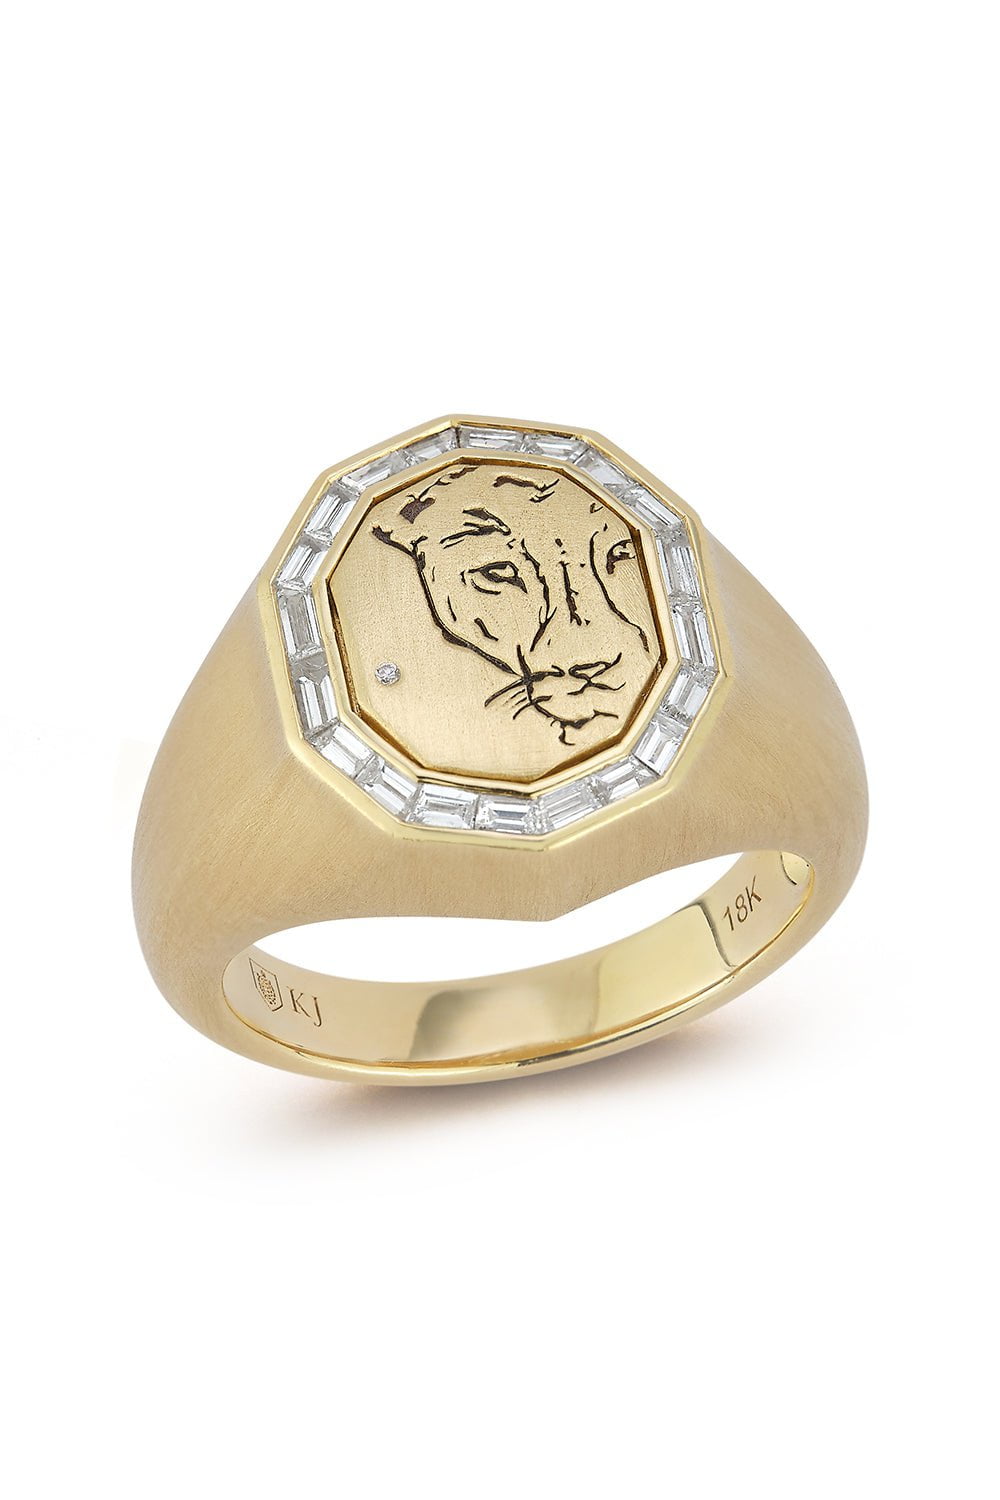 KATHERINE JETTER-The Baguette Lioness Ring-YELLOW GOLD